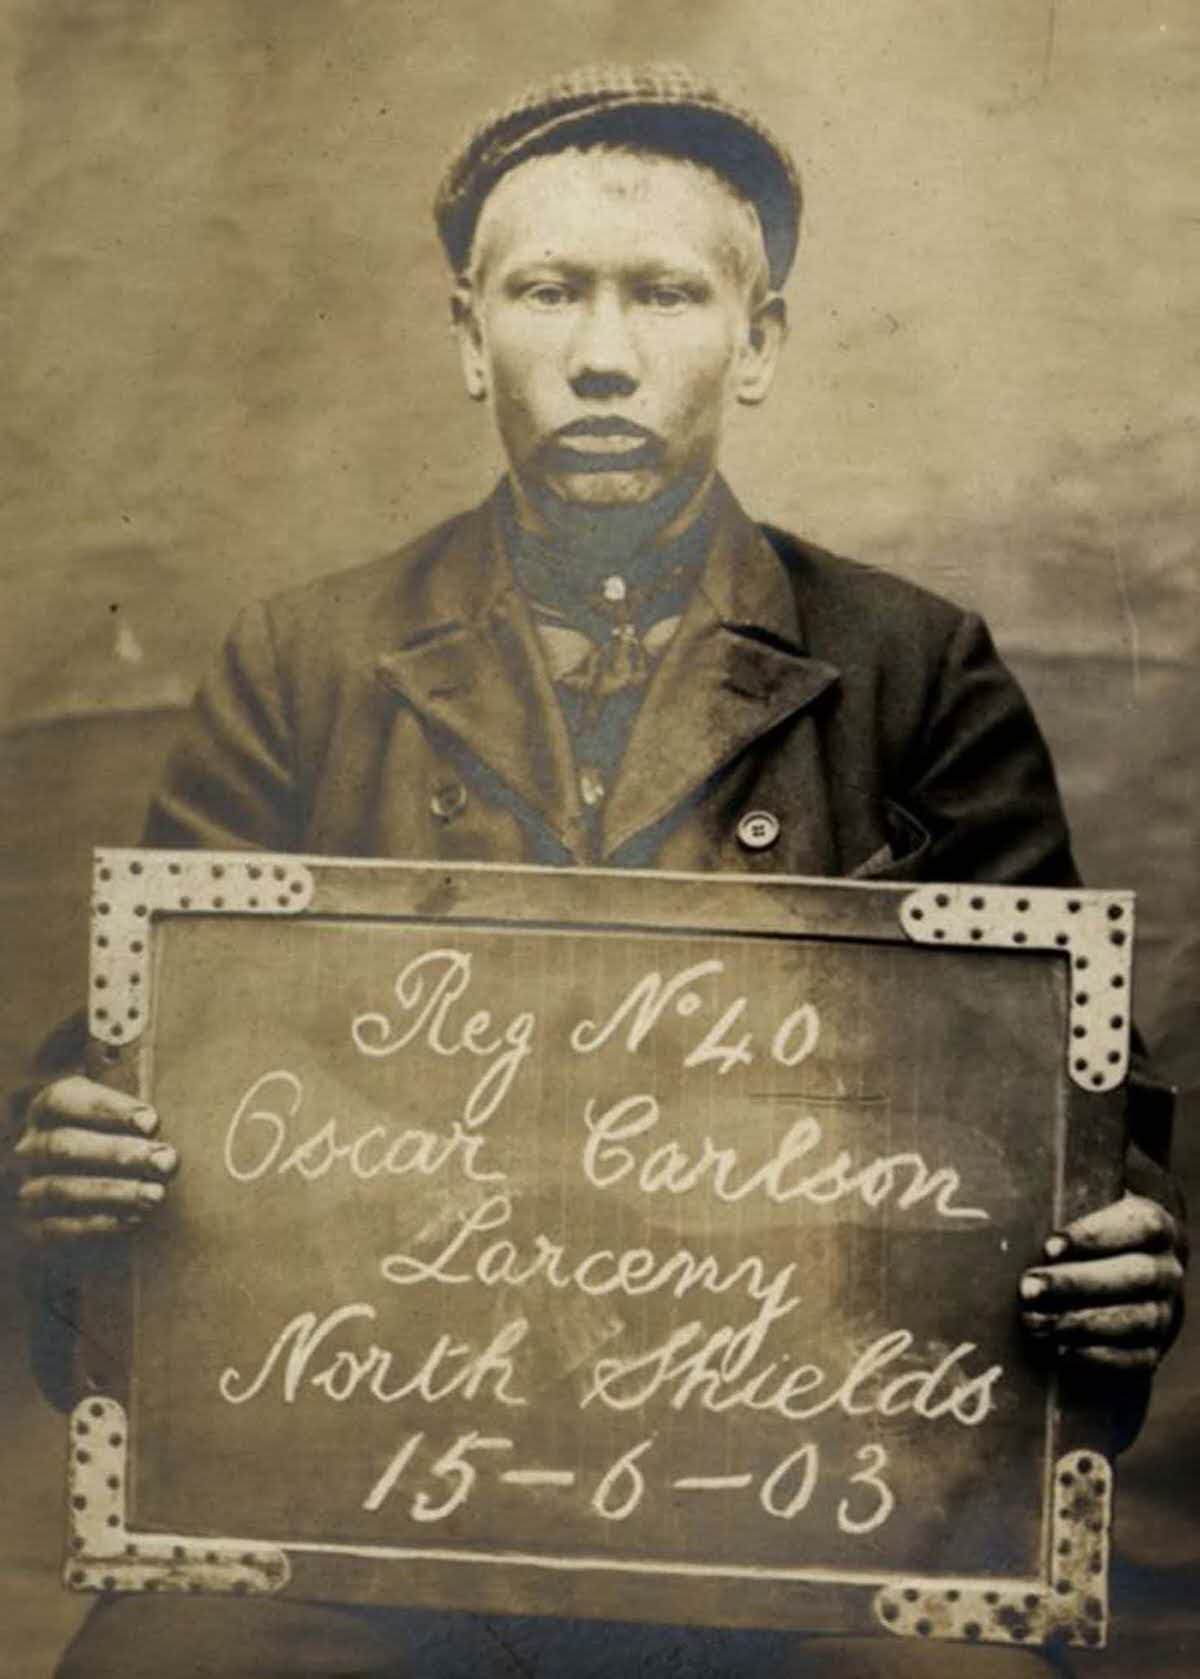 Oscar Carlson, age unknown, arrested for theft, 1903.